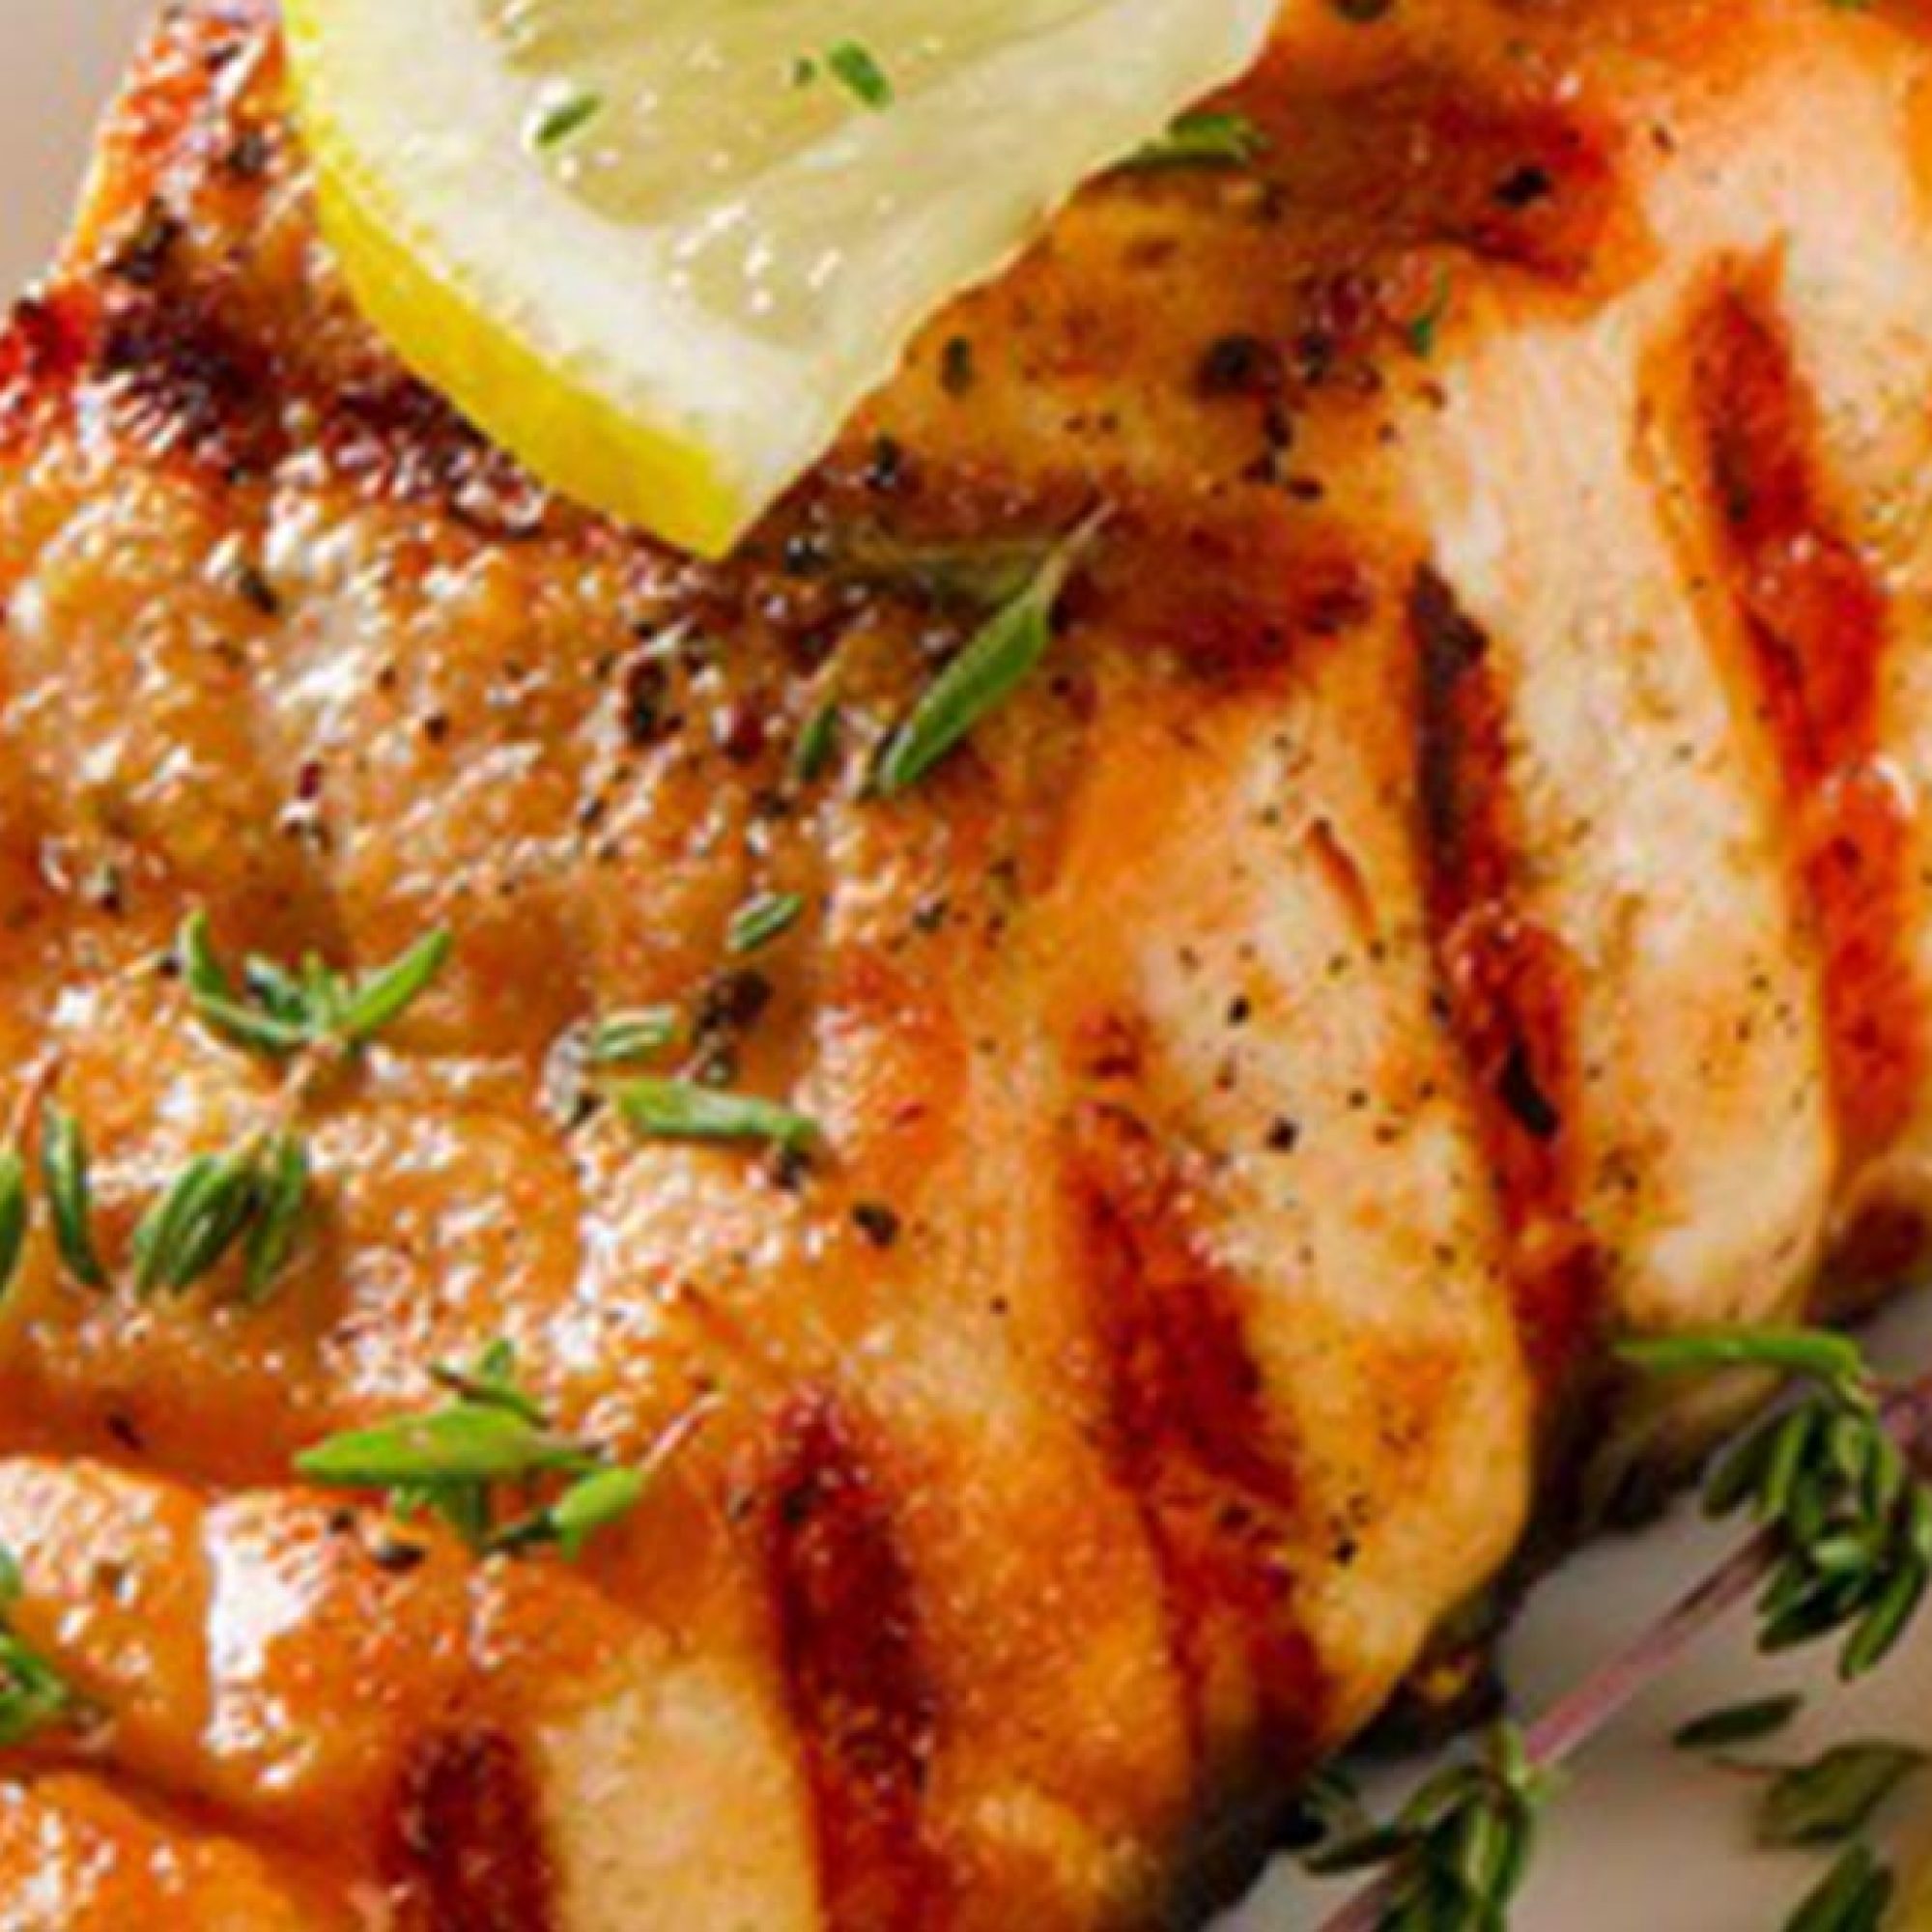 seafood recipes - BBQ Fish and Avocado Oil Sauce